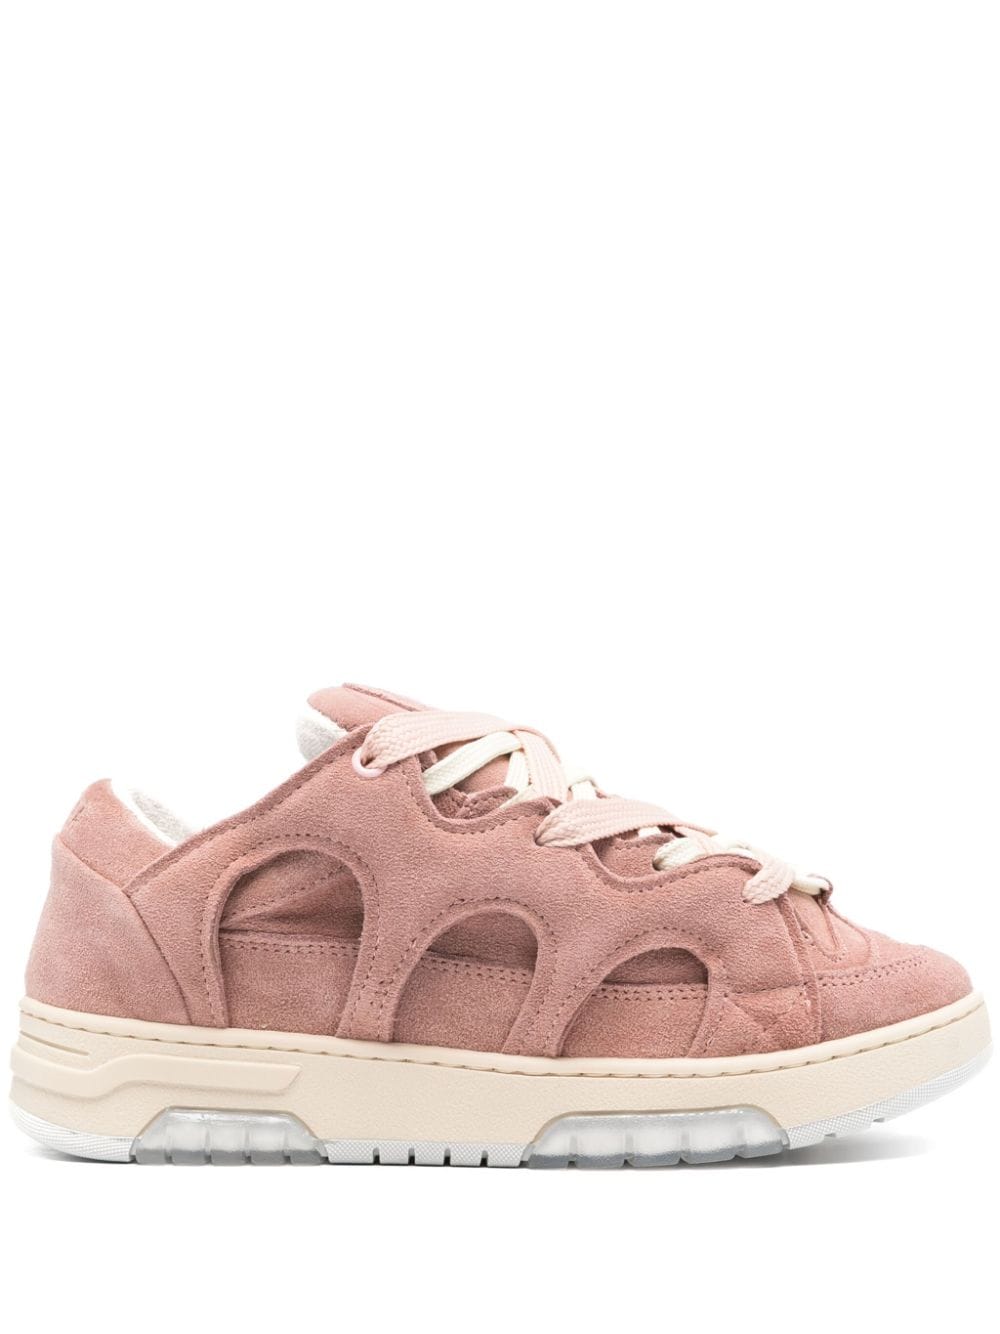 SANTHA panelled padded leather sneakers - Rosa